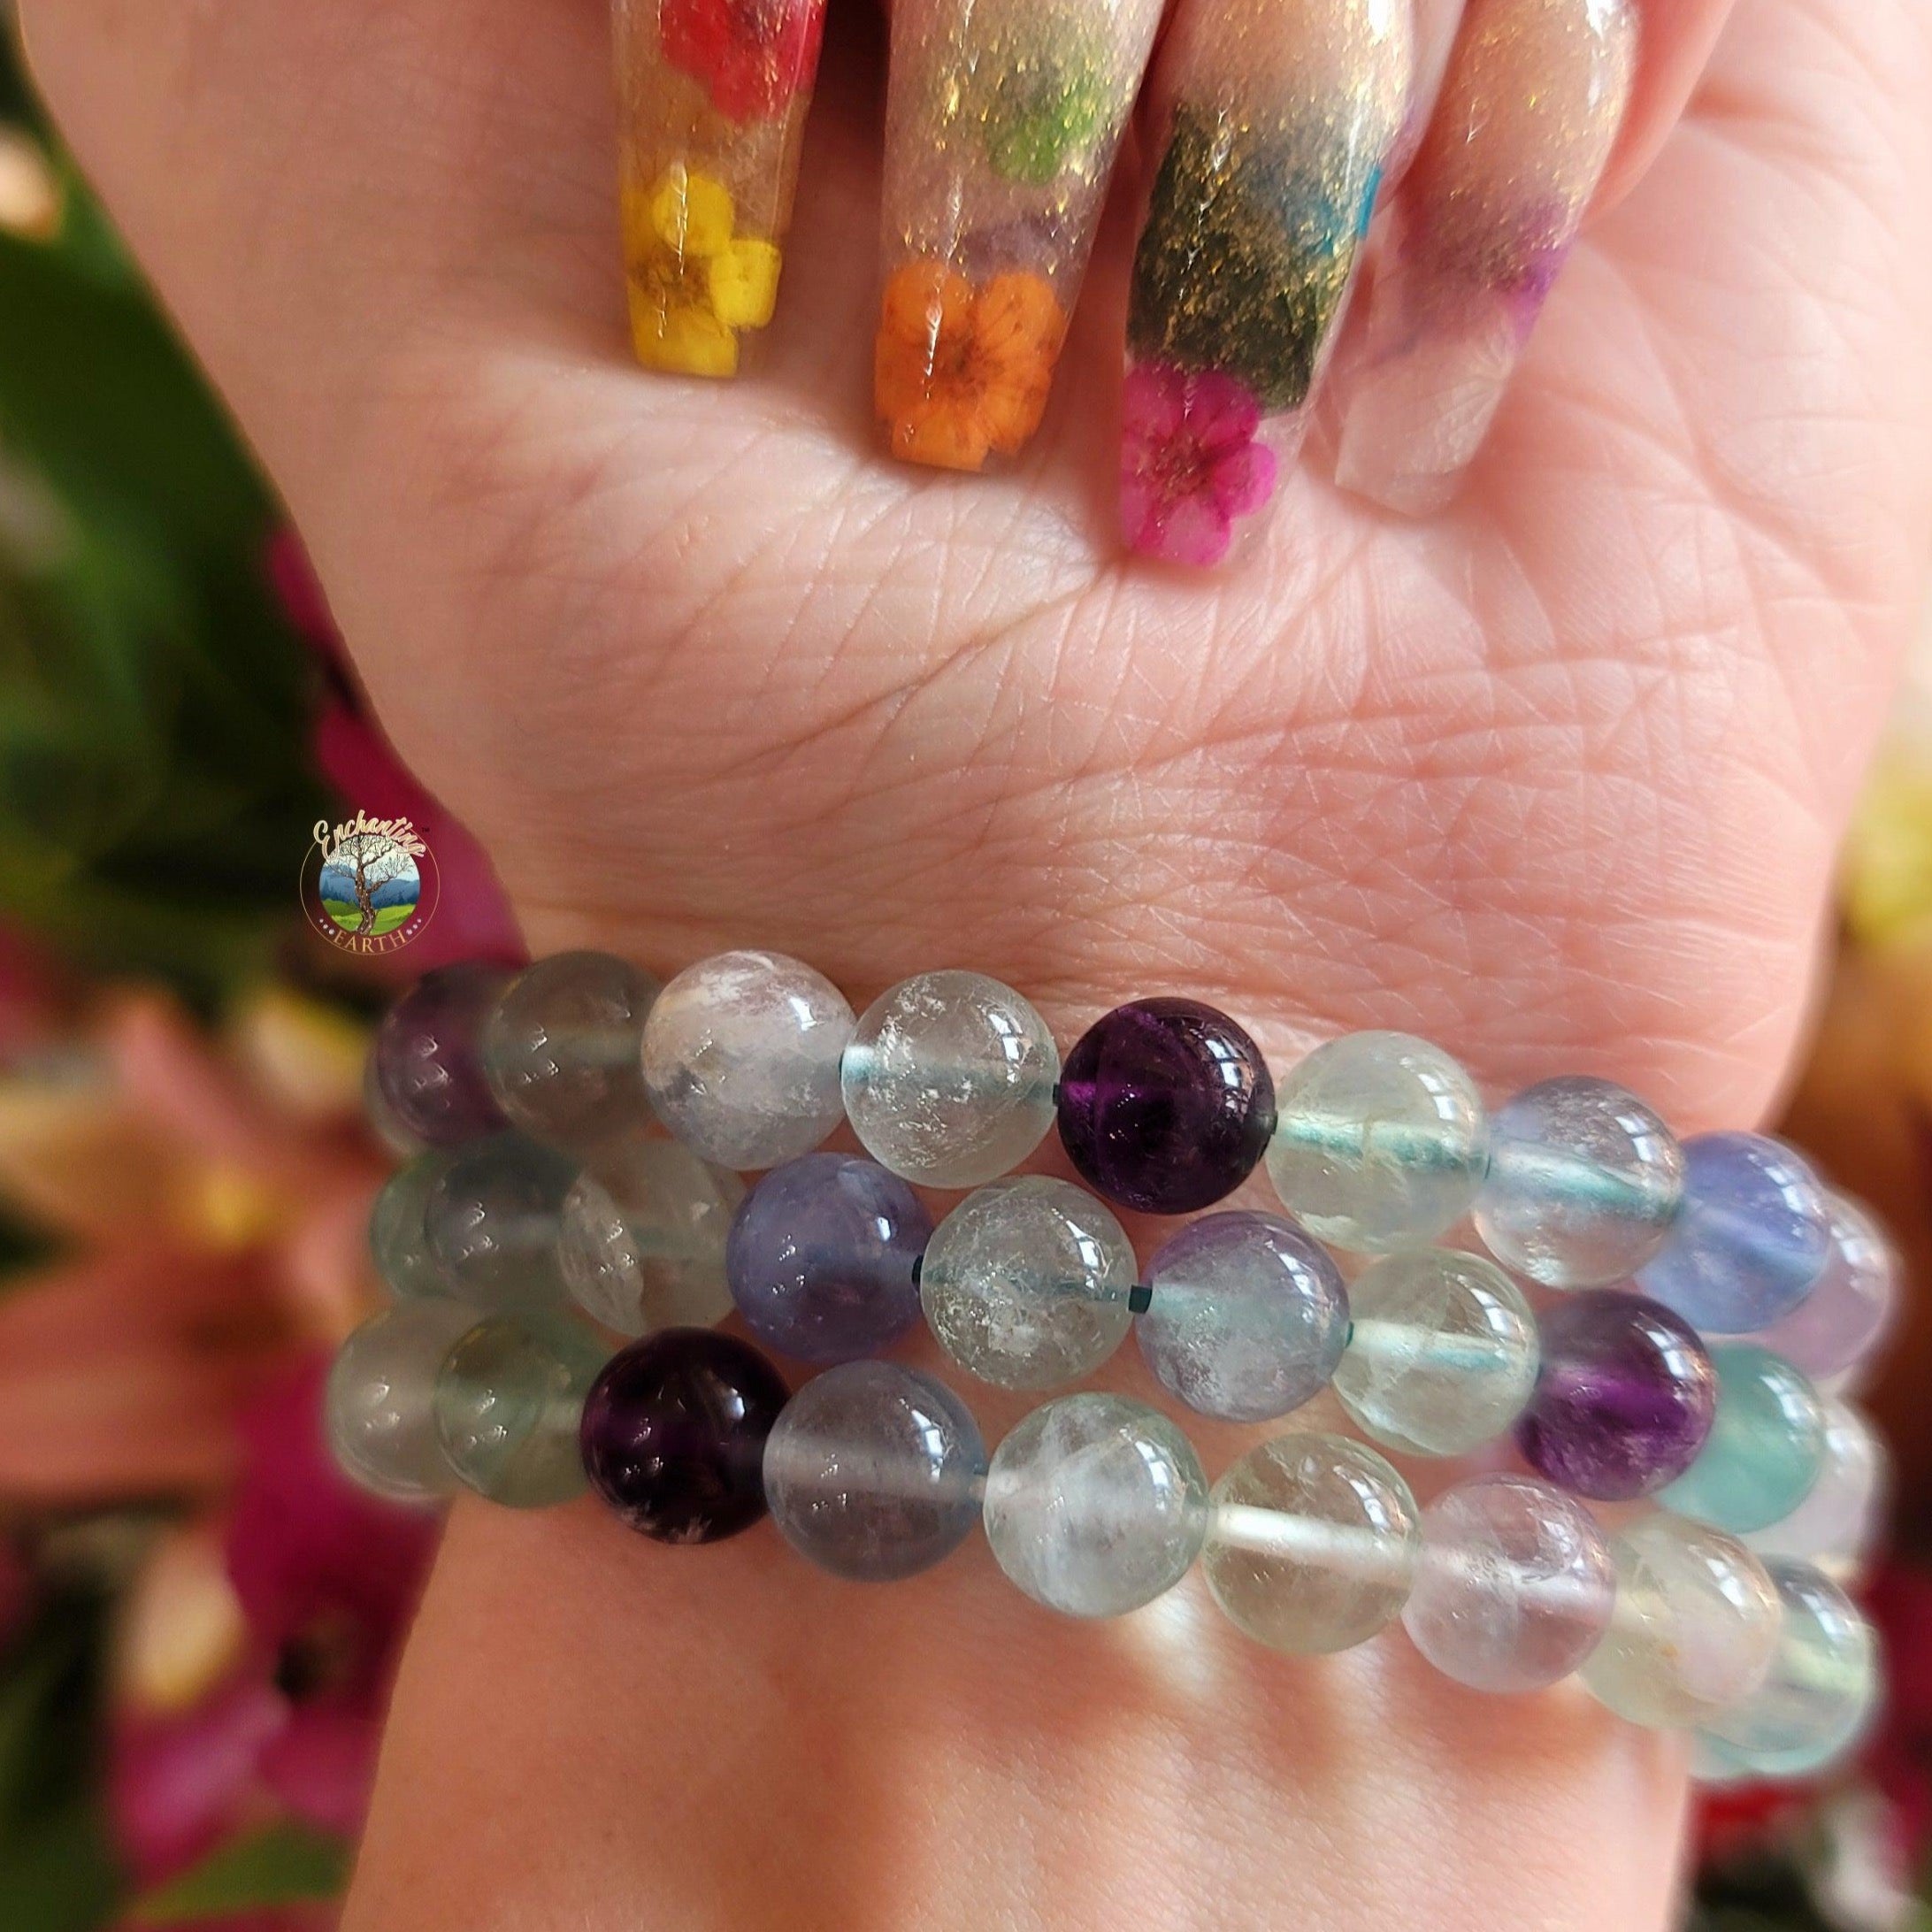 Fluorite Bracelet for Focus and Mental Clarity